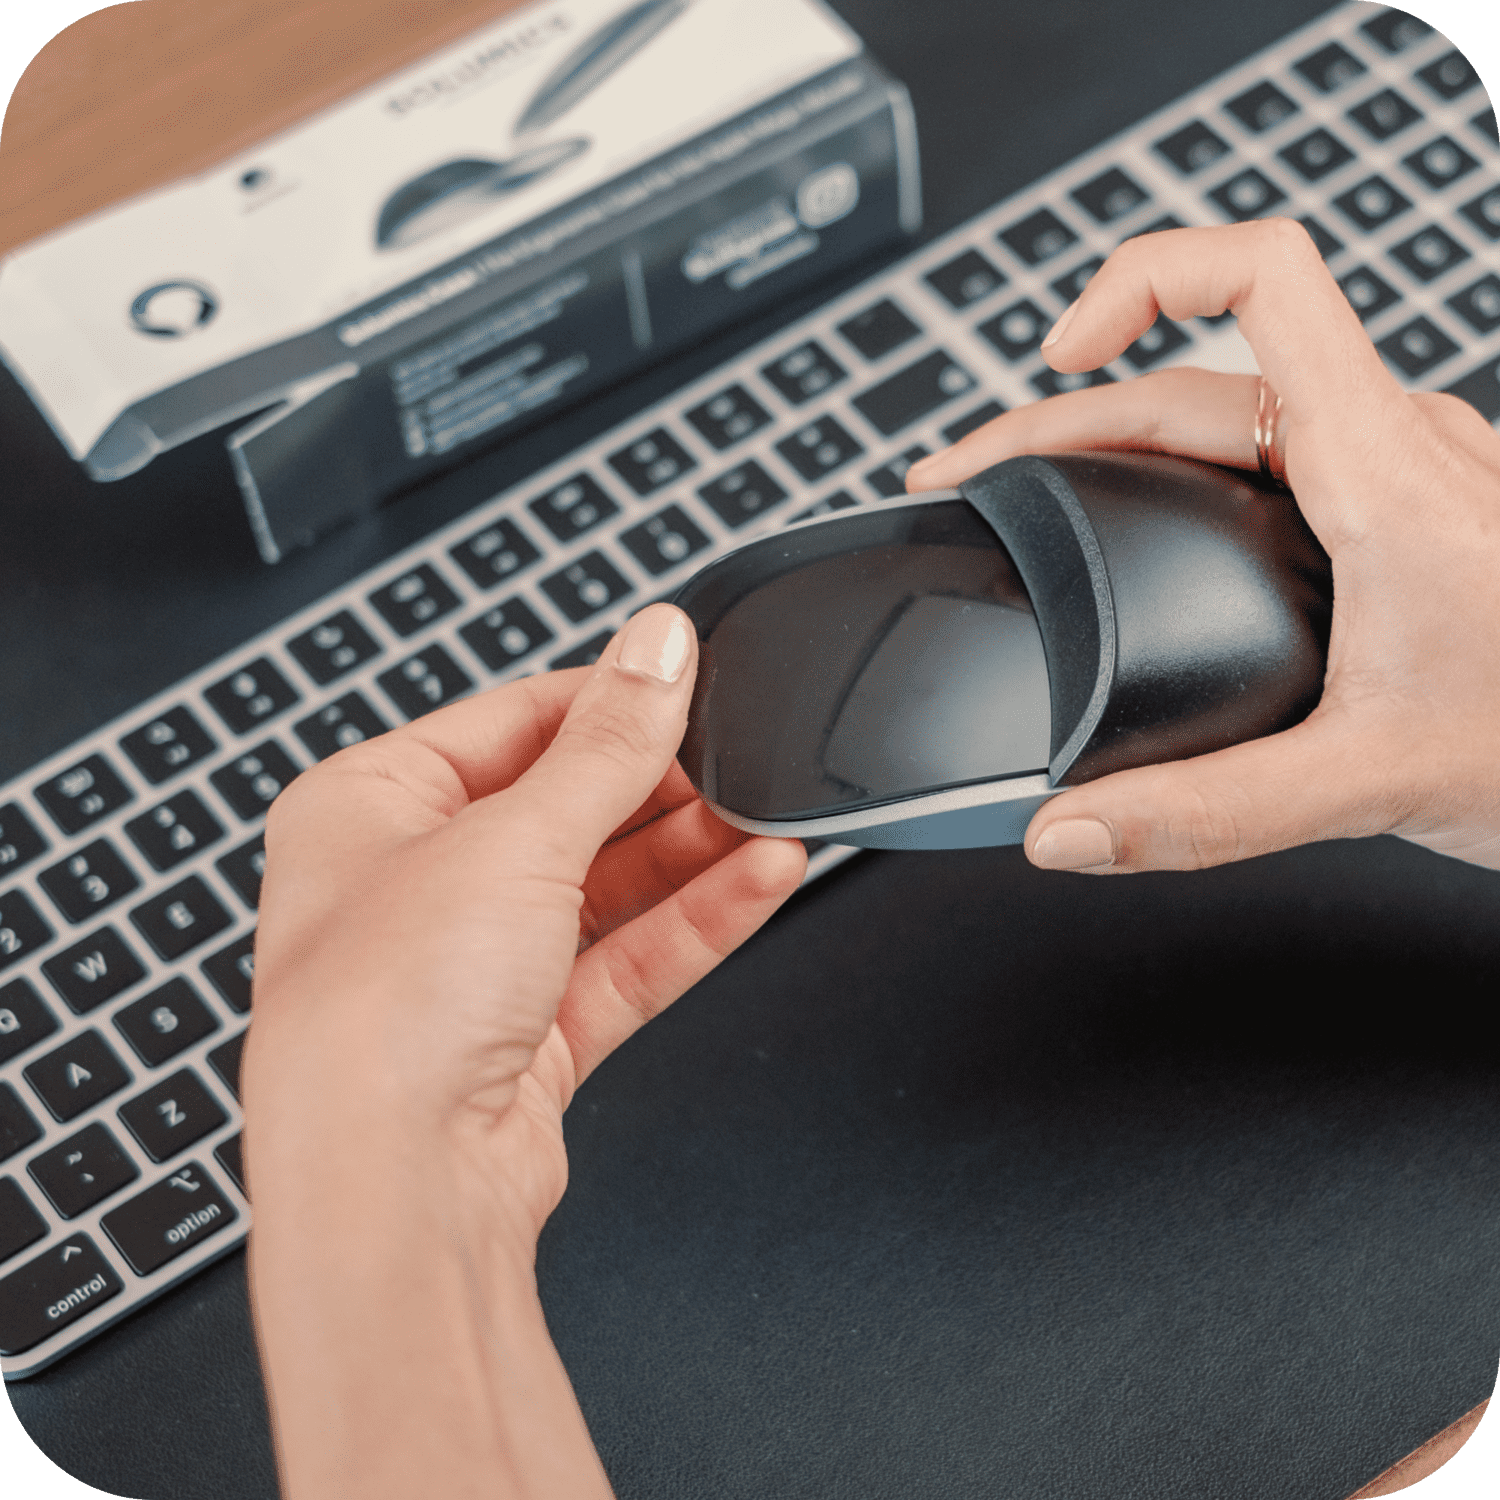 Apple Magic Mouse Ergonomic Case 3D Printing Magic Mouse 1 2 3 Home Office  Office Desk Accessory Mouse Case Gift Idea for Colleagues 